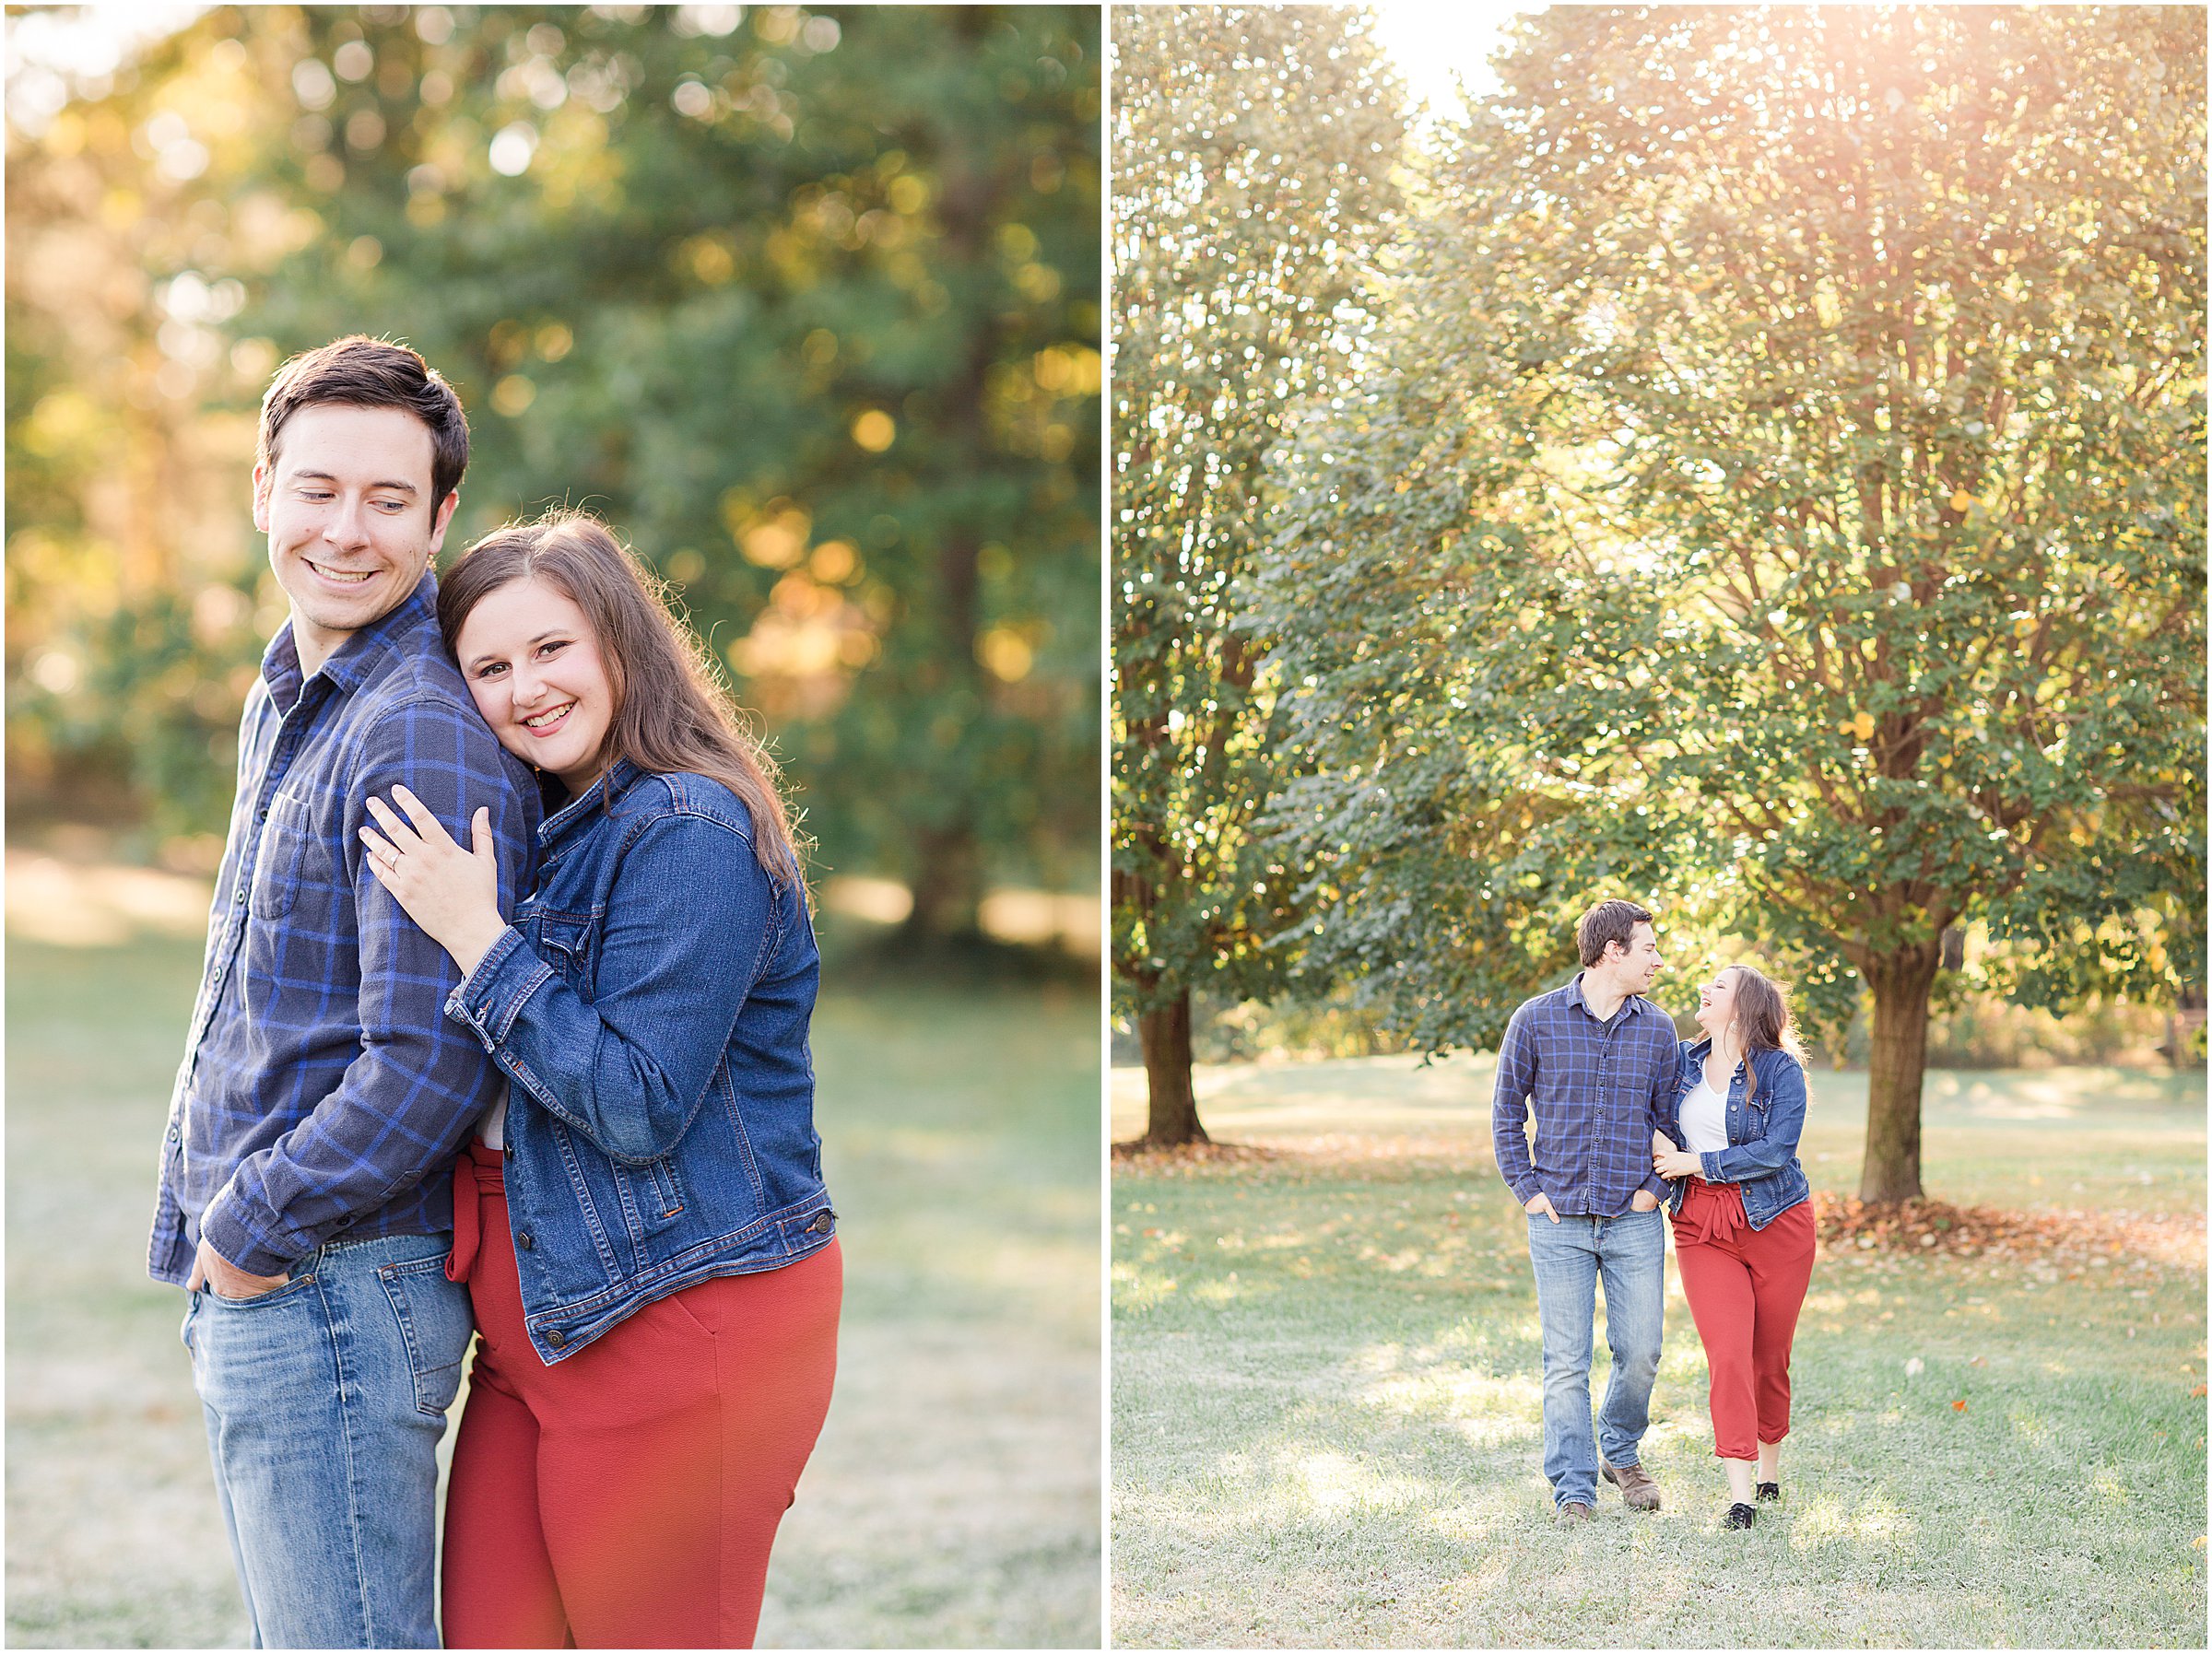 Holliday Park Engagement Session by Sami Renee_0010.jpg